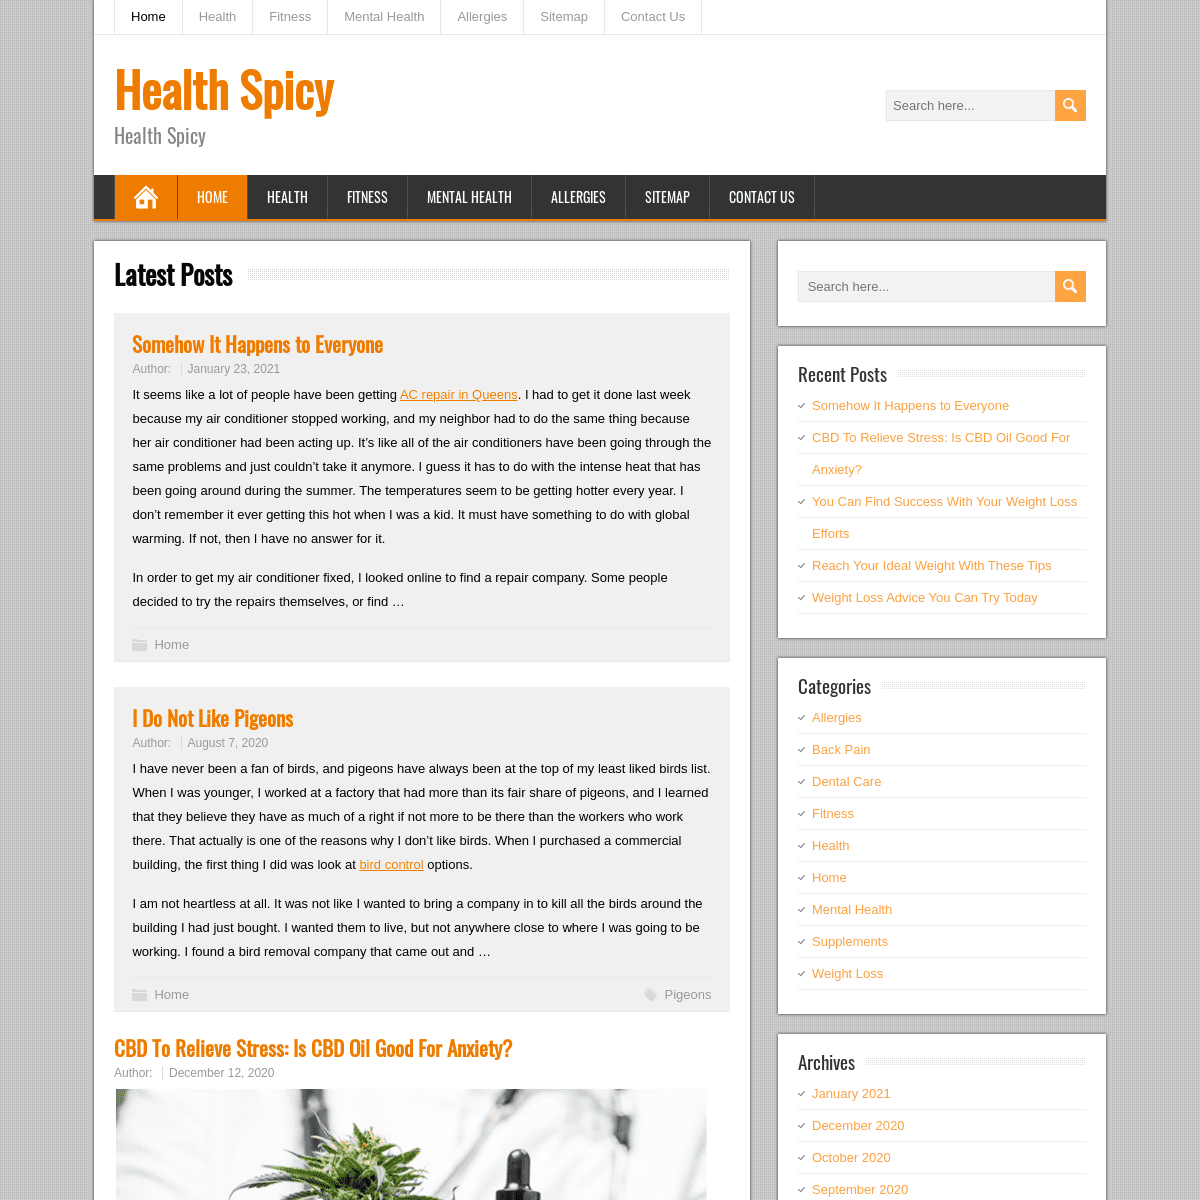 A complete backup of https://healthspicy.com